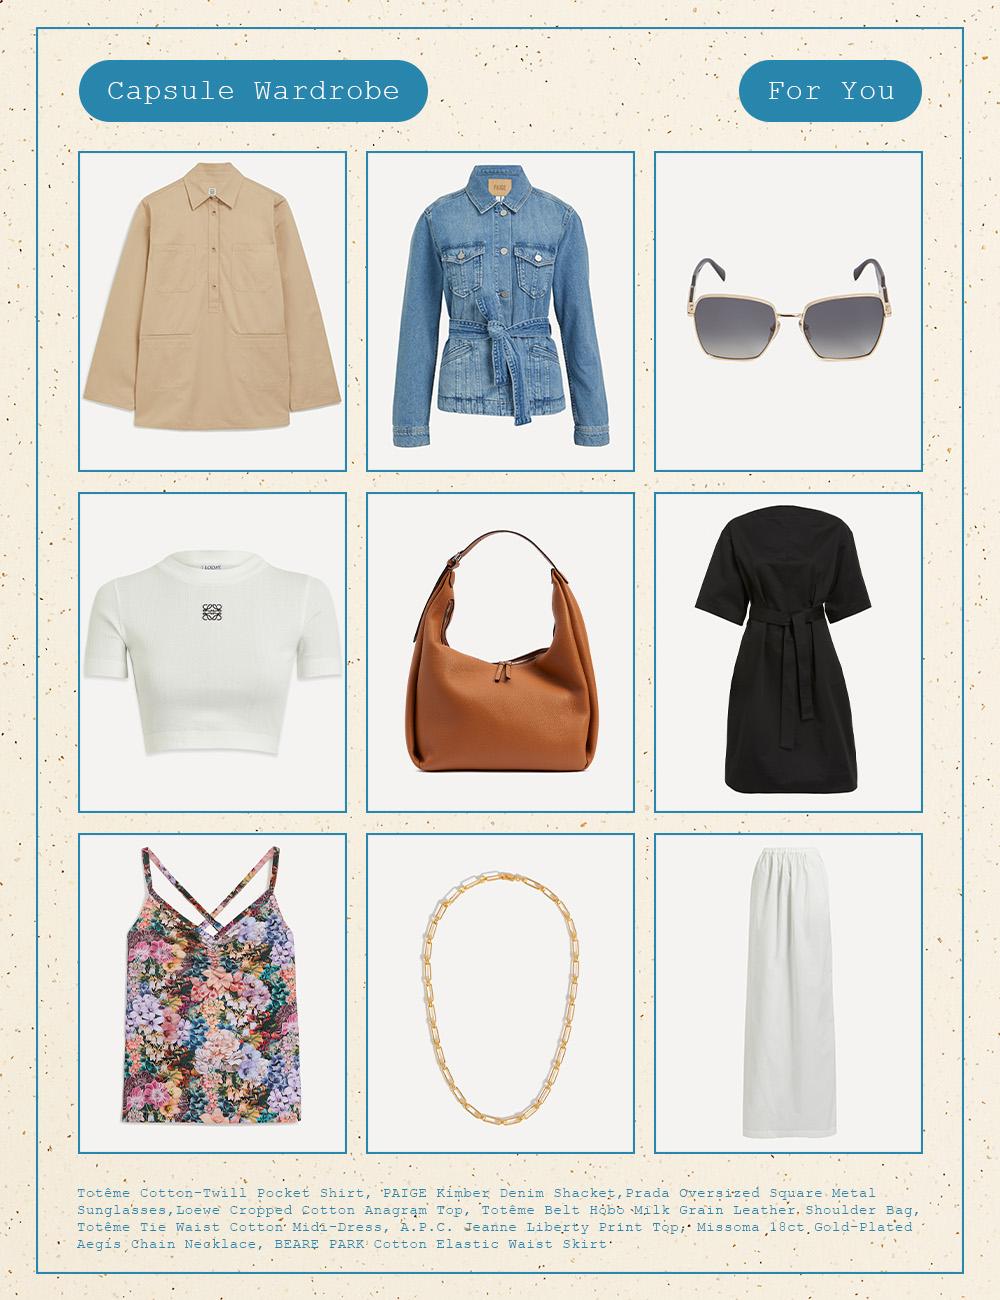 How to Build Your Perfect Neutral Capsule Wardrobe: Guide